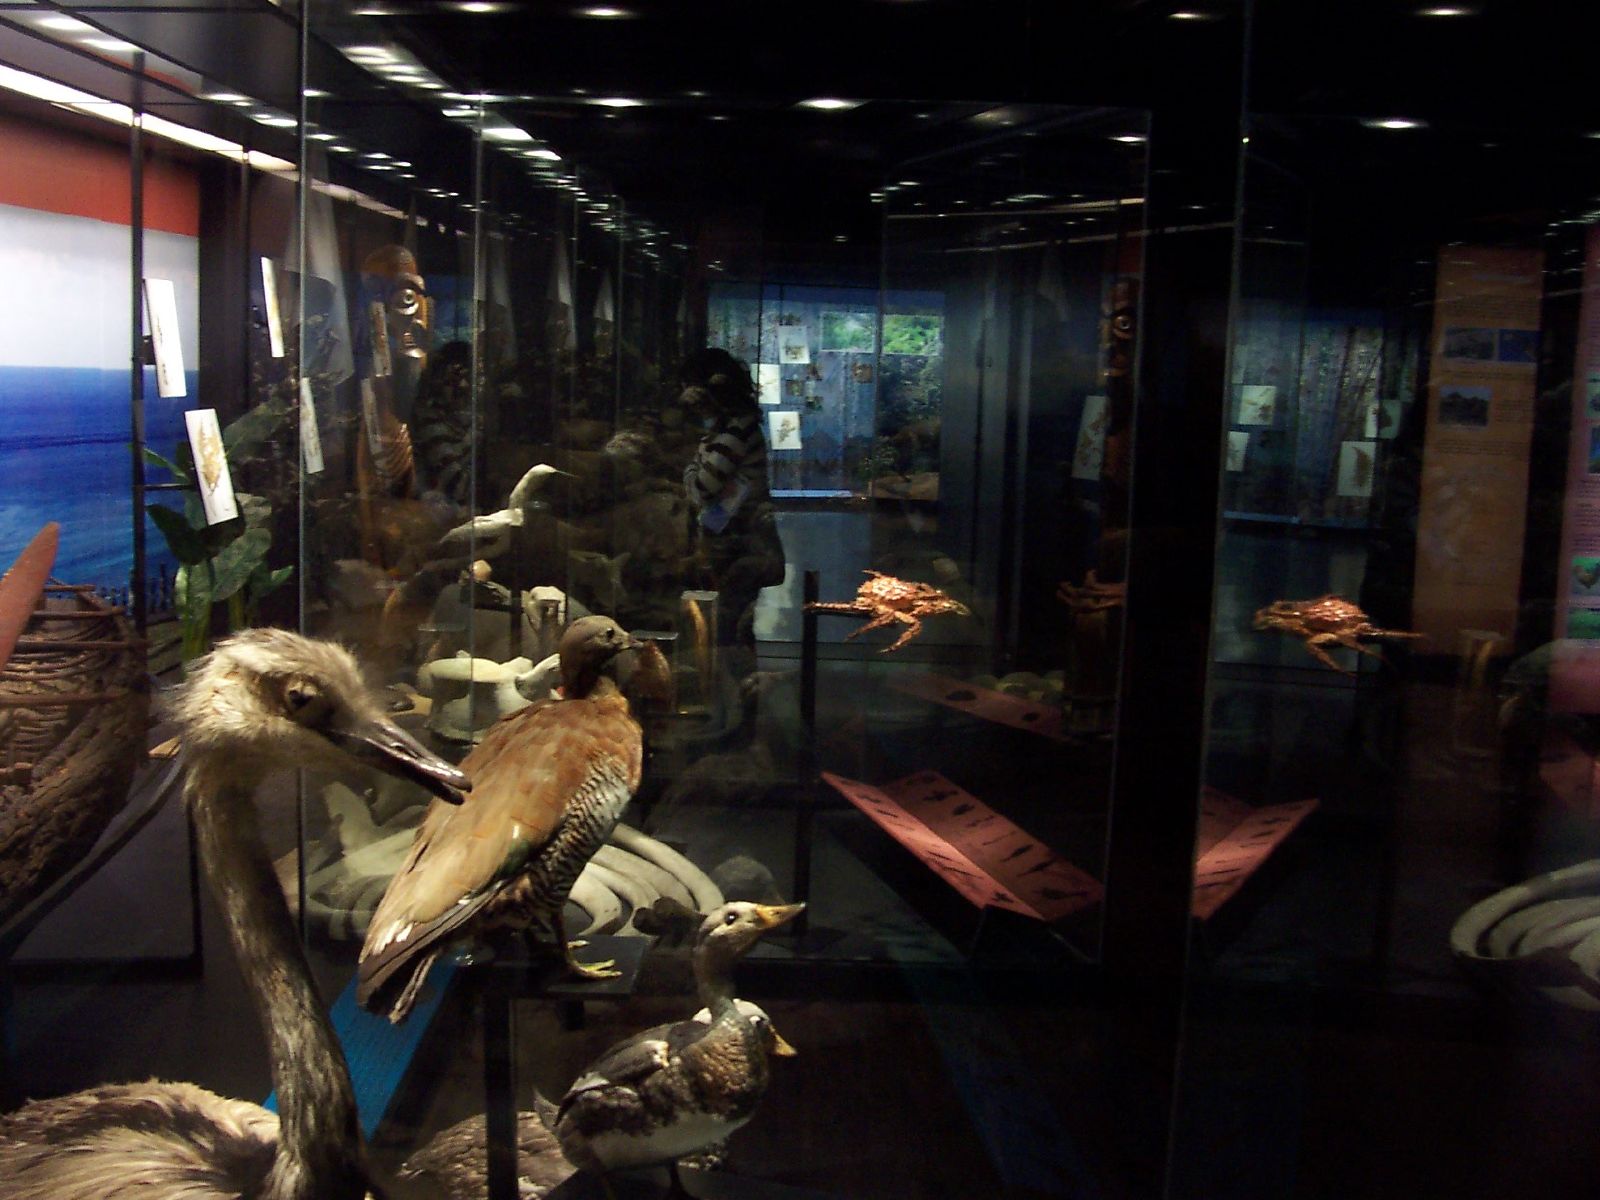 some animals on display inside of glass cases